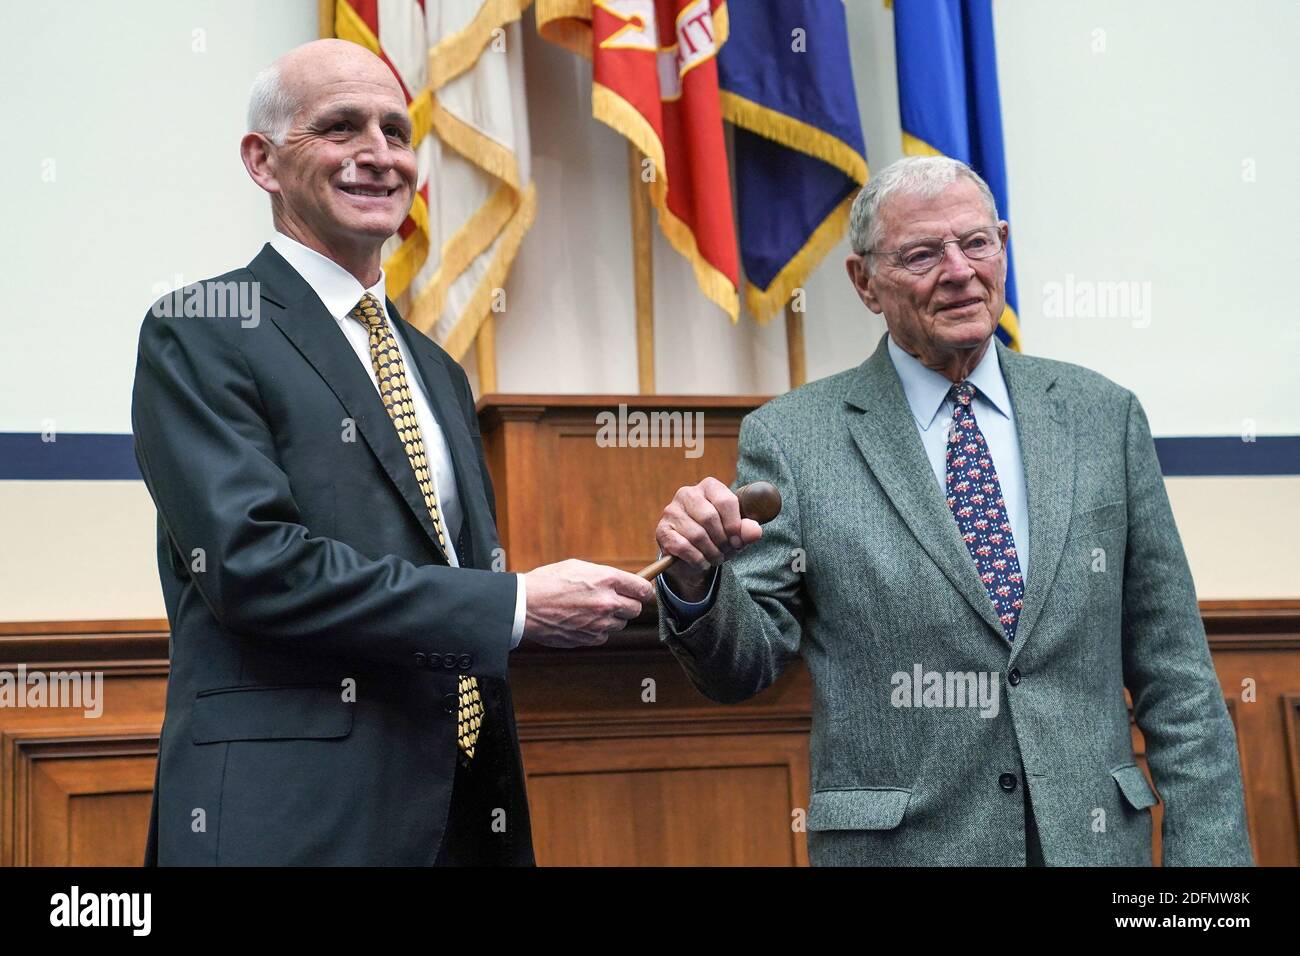 House Armed Services Chairman Adam Smith Washington (D-Wash) ceremoniously passes over the gavel to Senate Armed Services Committee Chairman James Inhofe (R-Okla.) during a photo op at the Capitol on Wednesday, November 18, 2020 in Washington, DC, USA. Photo by Bonnie Cash/Pool/ABACAPRESS.COM Stock Photo